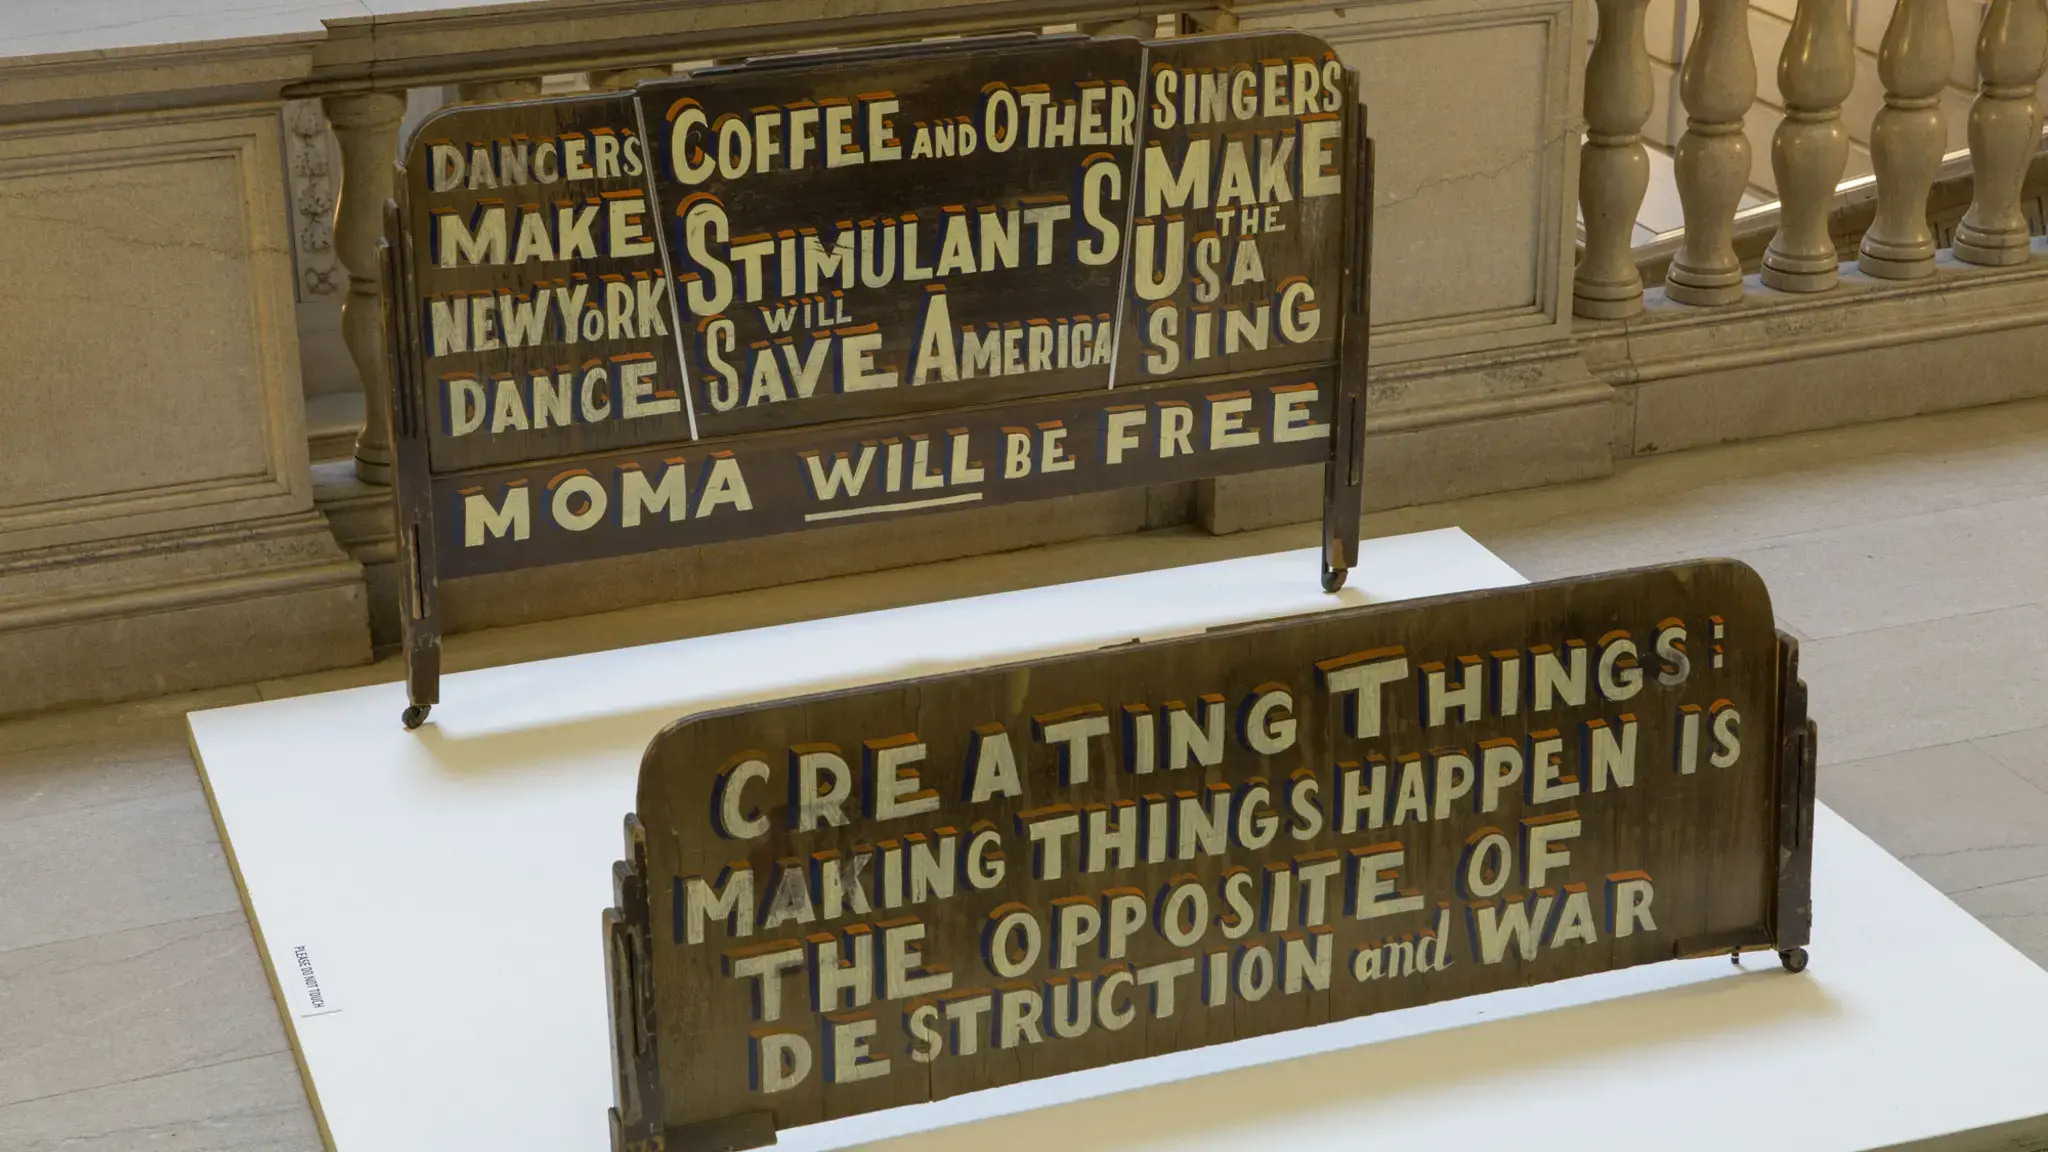 Bob and Roberta Smith, MoMA WILL BE FREE (2011) and CREATING THINGS (2011), installed as part of Framing Fraktur at the Free Library of Philadelphia. Courtesy of the Free Library of Philadelphia.